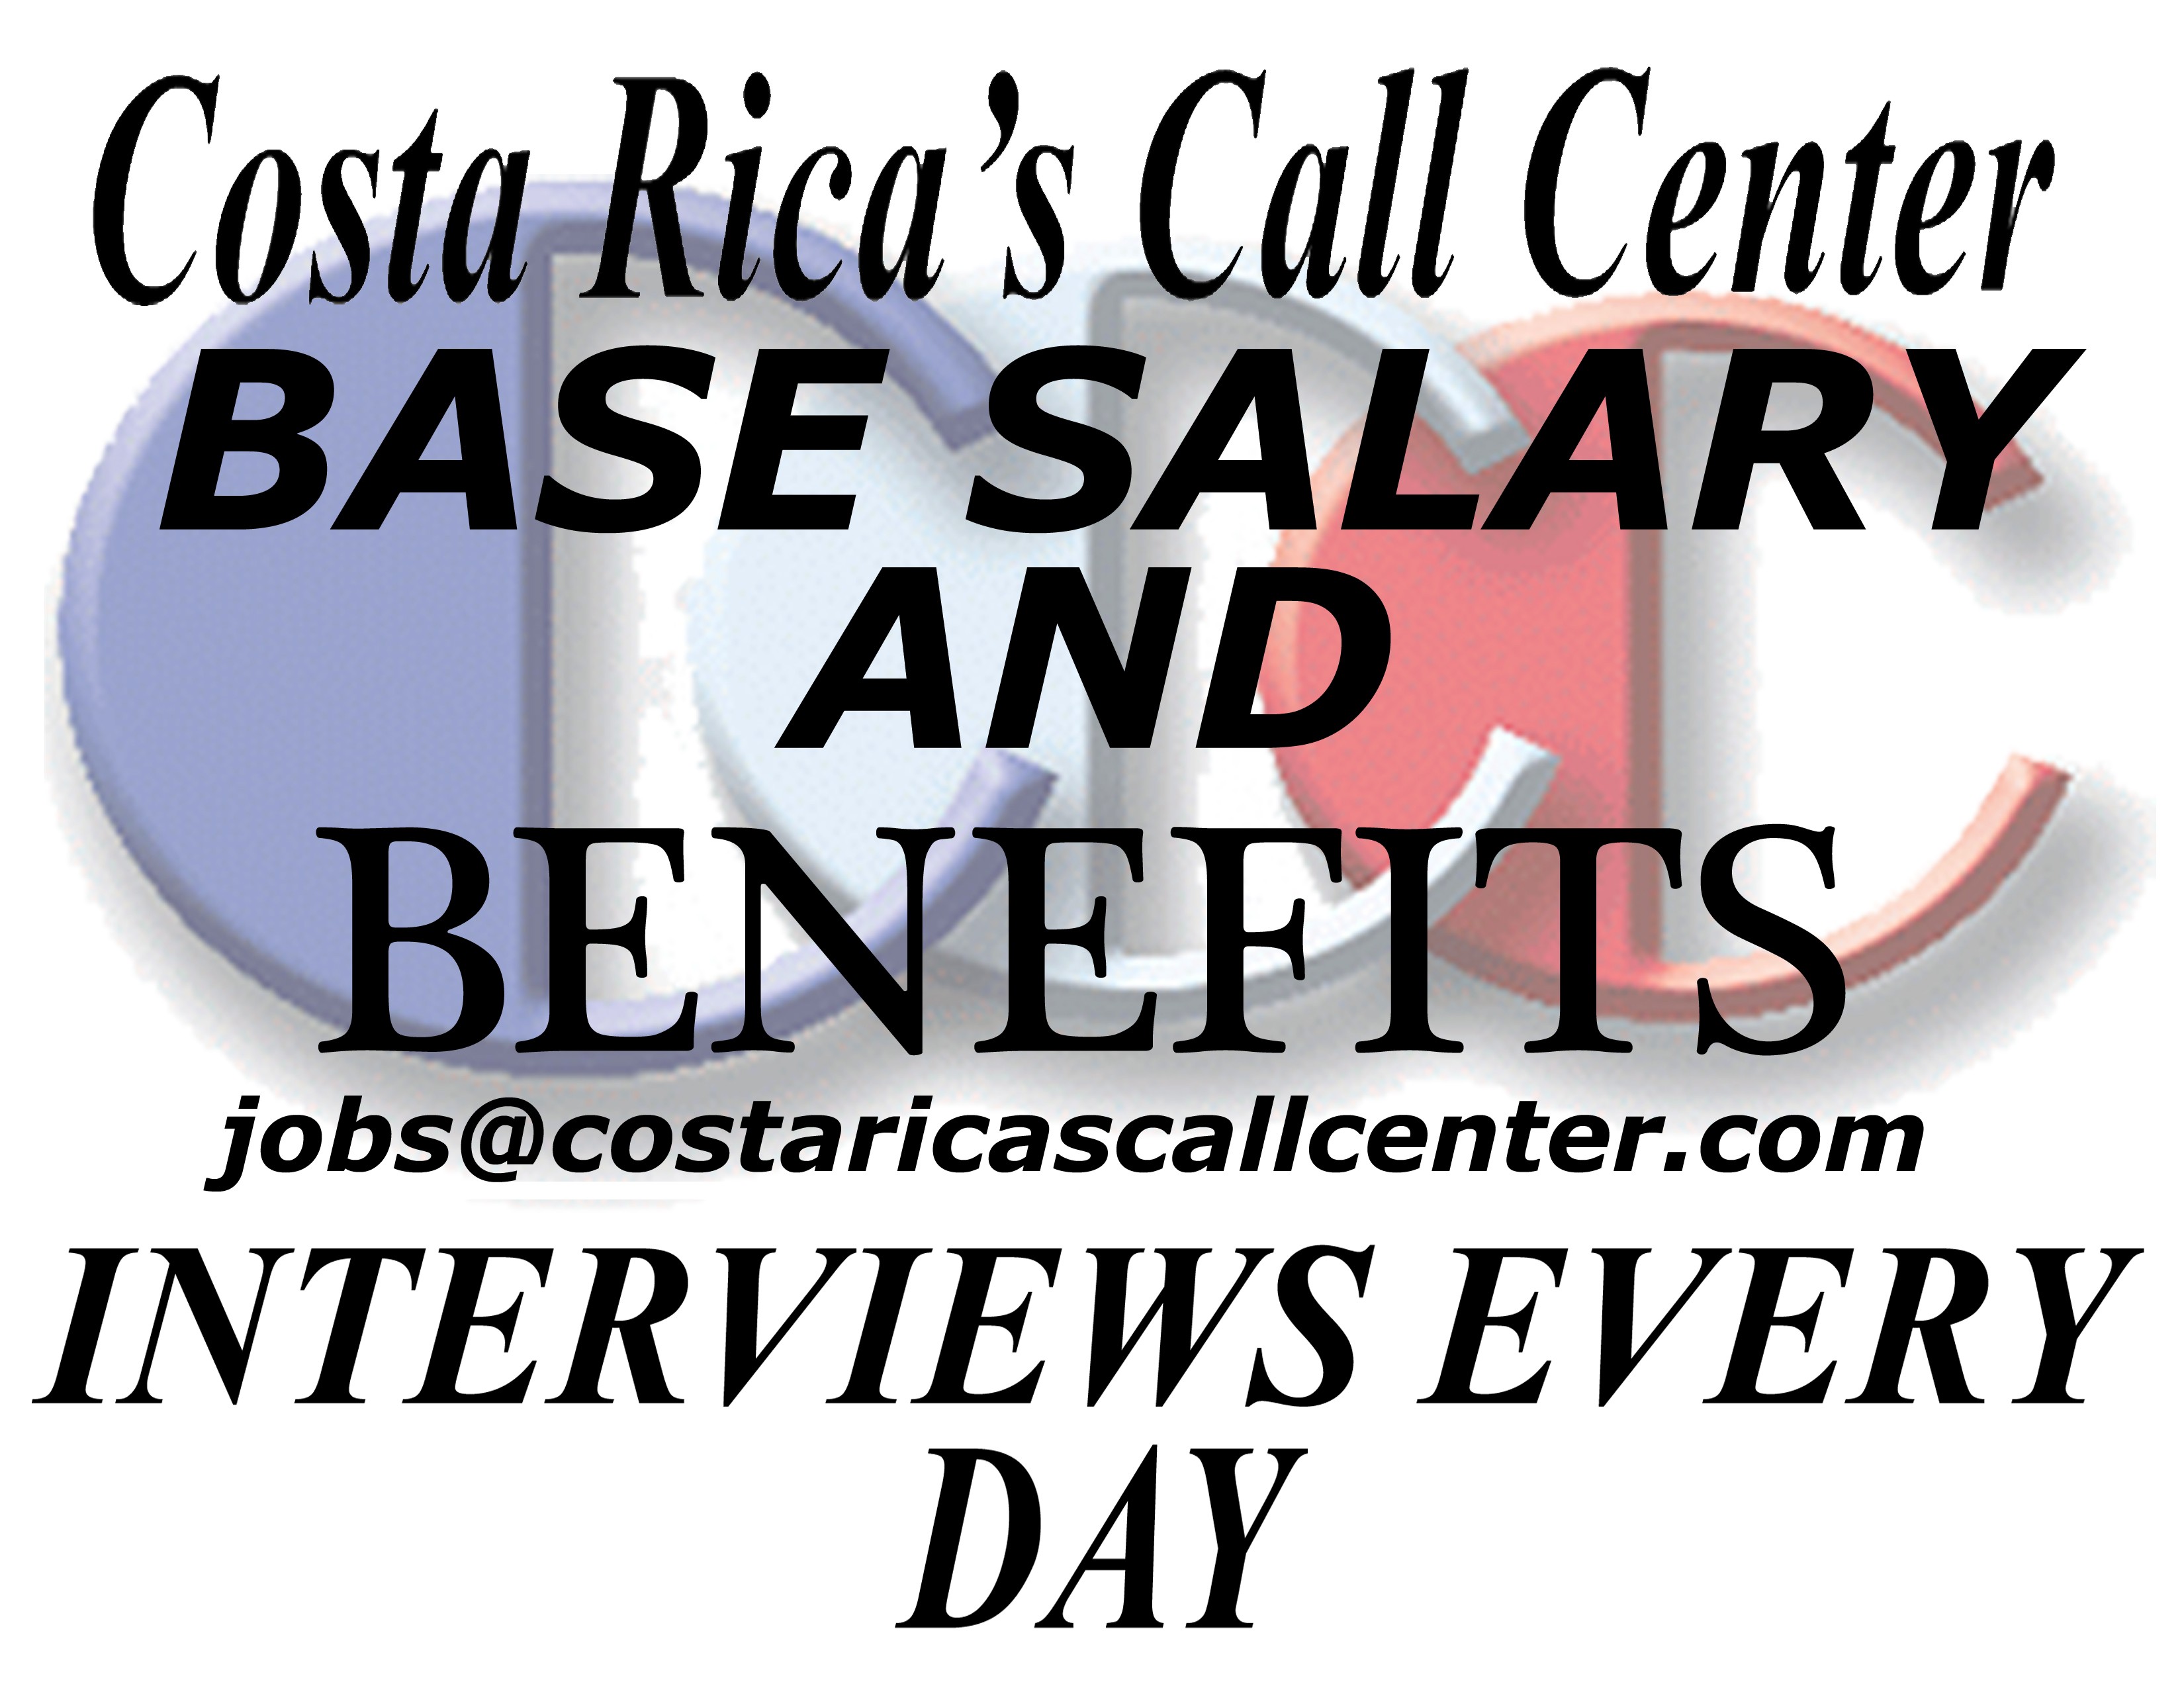 THE OUTSOURCING INDUSTRY ACKNOWLEDGES A 10 YEAR ANNIVERSARY FOR COSTA RICA'S CALL CENTER.